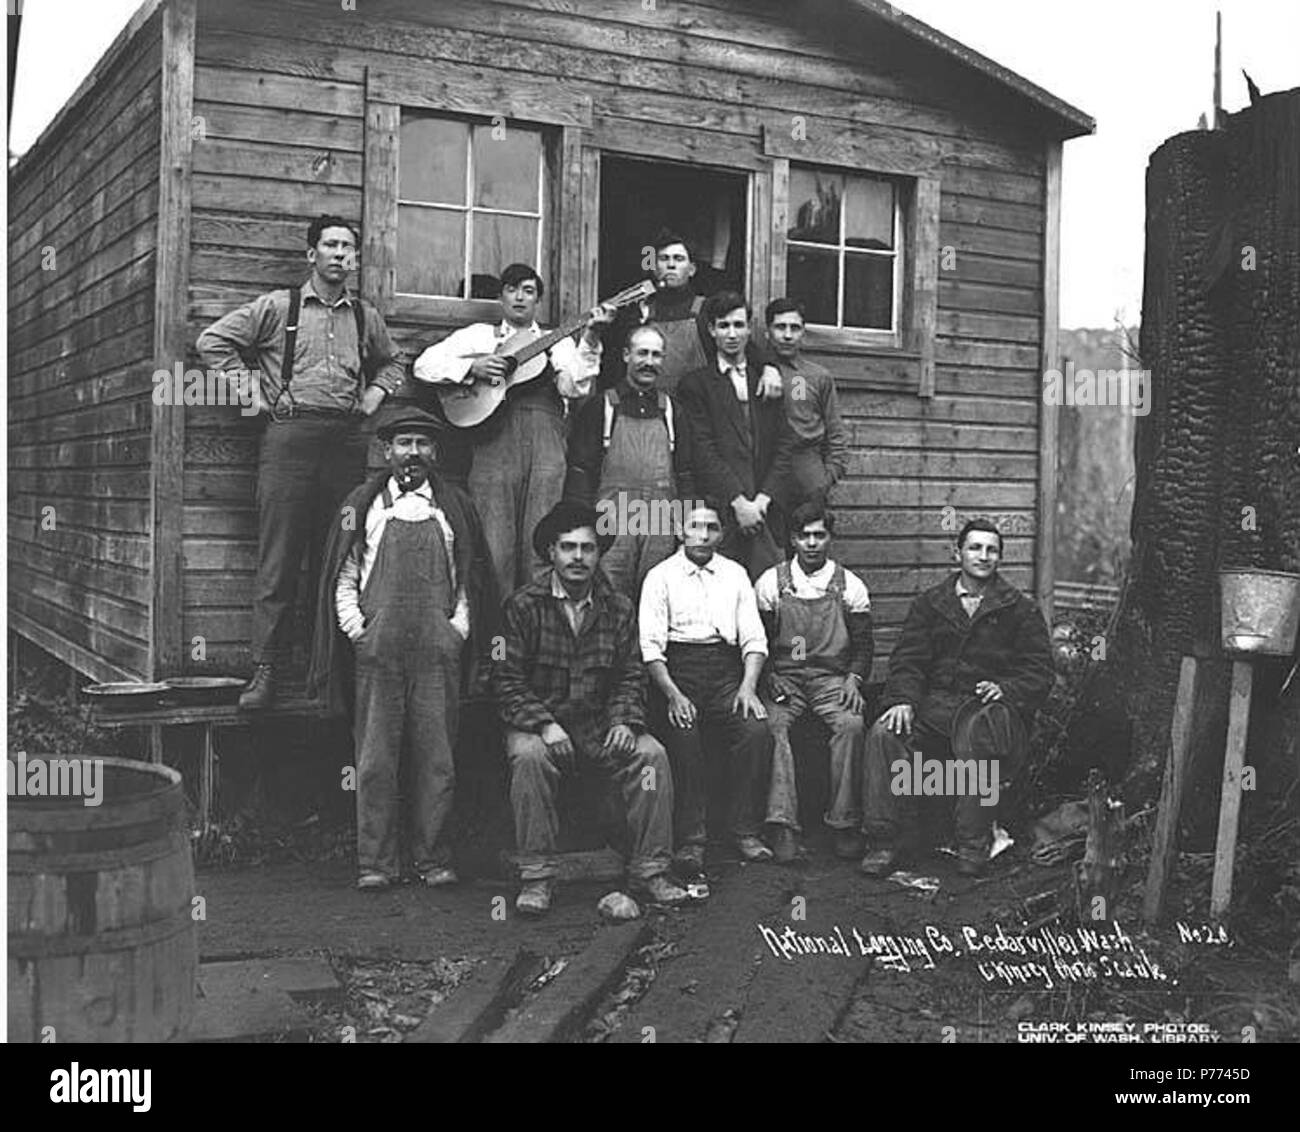 . English: Logging crew at bunkhouse, National Lumber and Manufacturing Company, ca. 1920 . English: Caption on image: National Logging Co., Cedarville, Wash. C. Kinsey Photo, Seattle. No. 20 PH Coll 516.2231 The National Lumber & Manufacturing Company was in business from 1920 to 1927, with headquarters and mill in Hoquiam and logging operations first in Cedarville and then, by 1924, in Elma. National Lumber was sold to Polson Lumber Company in 1927. Cedarville is a small settlement near the Chehalis River, eleven miles southeast of Elma, in southeast Grays Harbor County. In 1855, it was esta Stock Photo